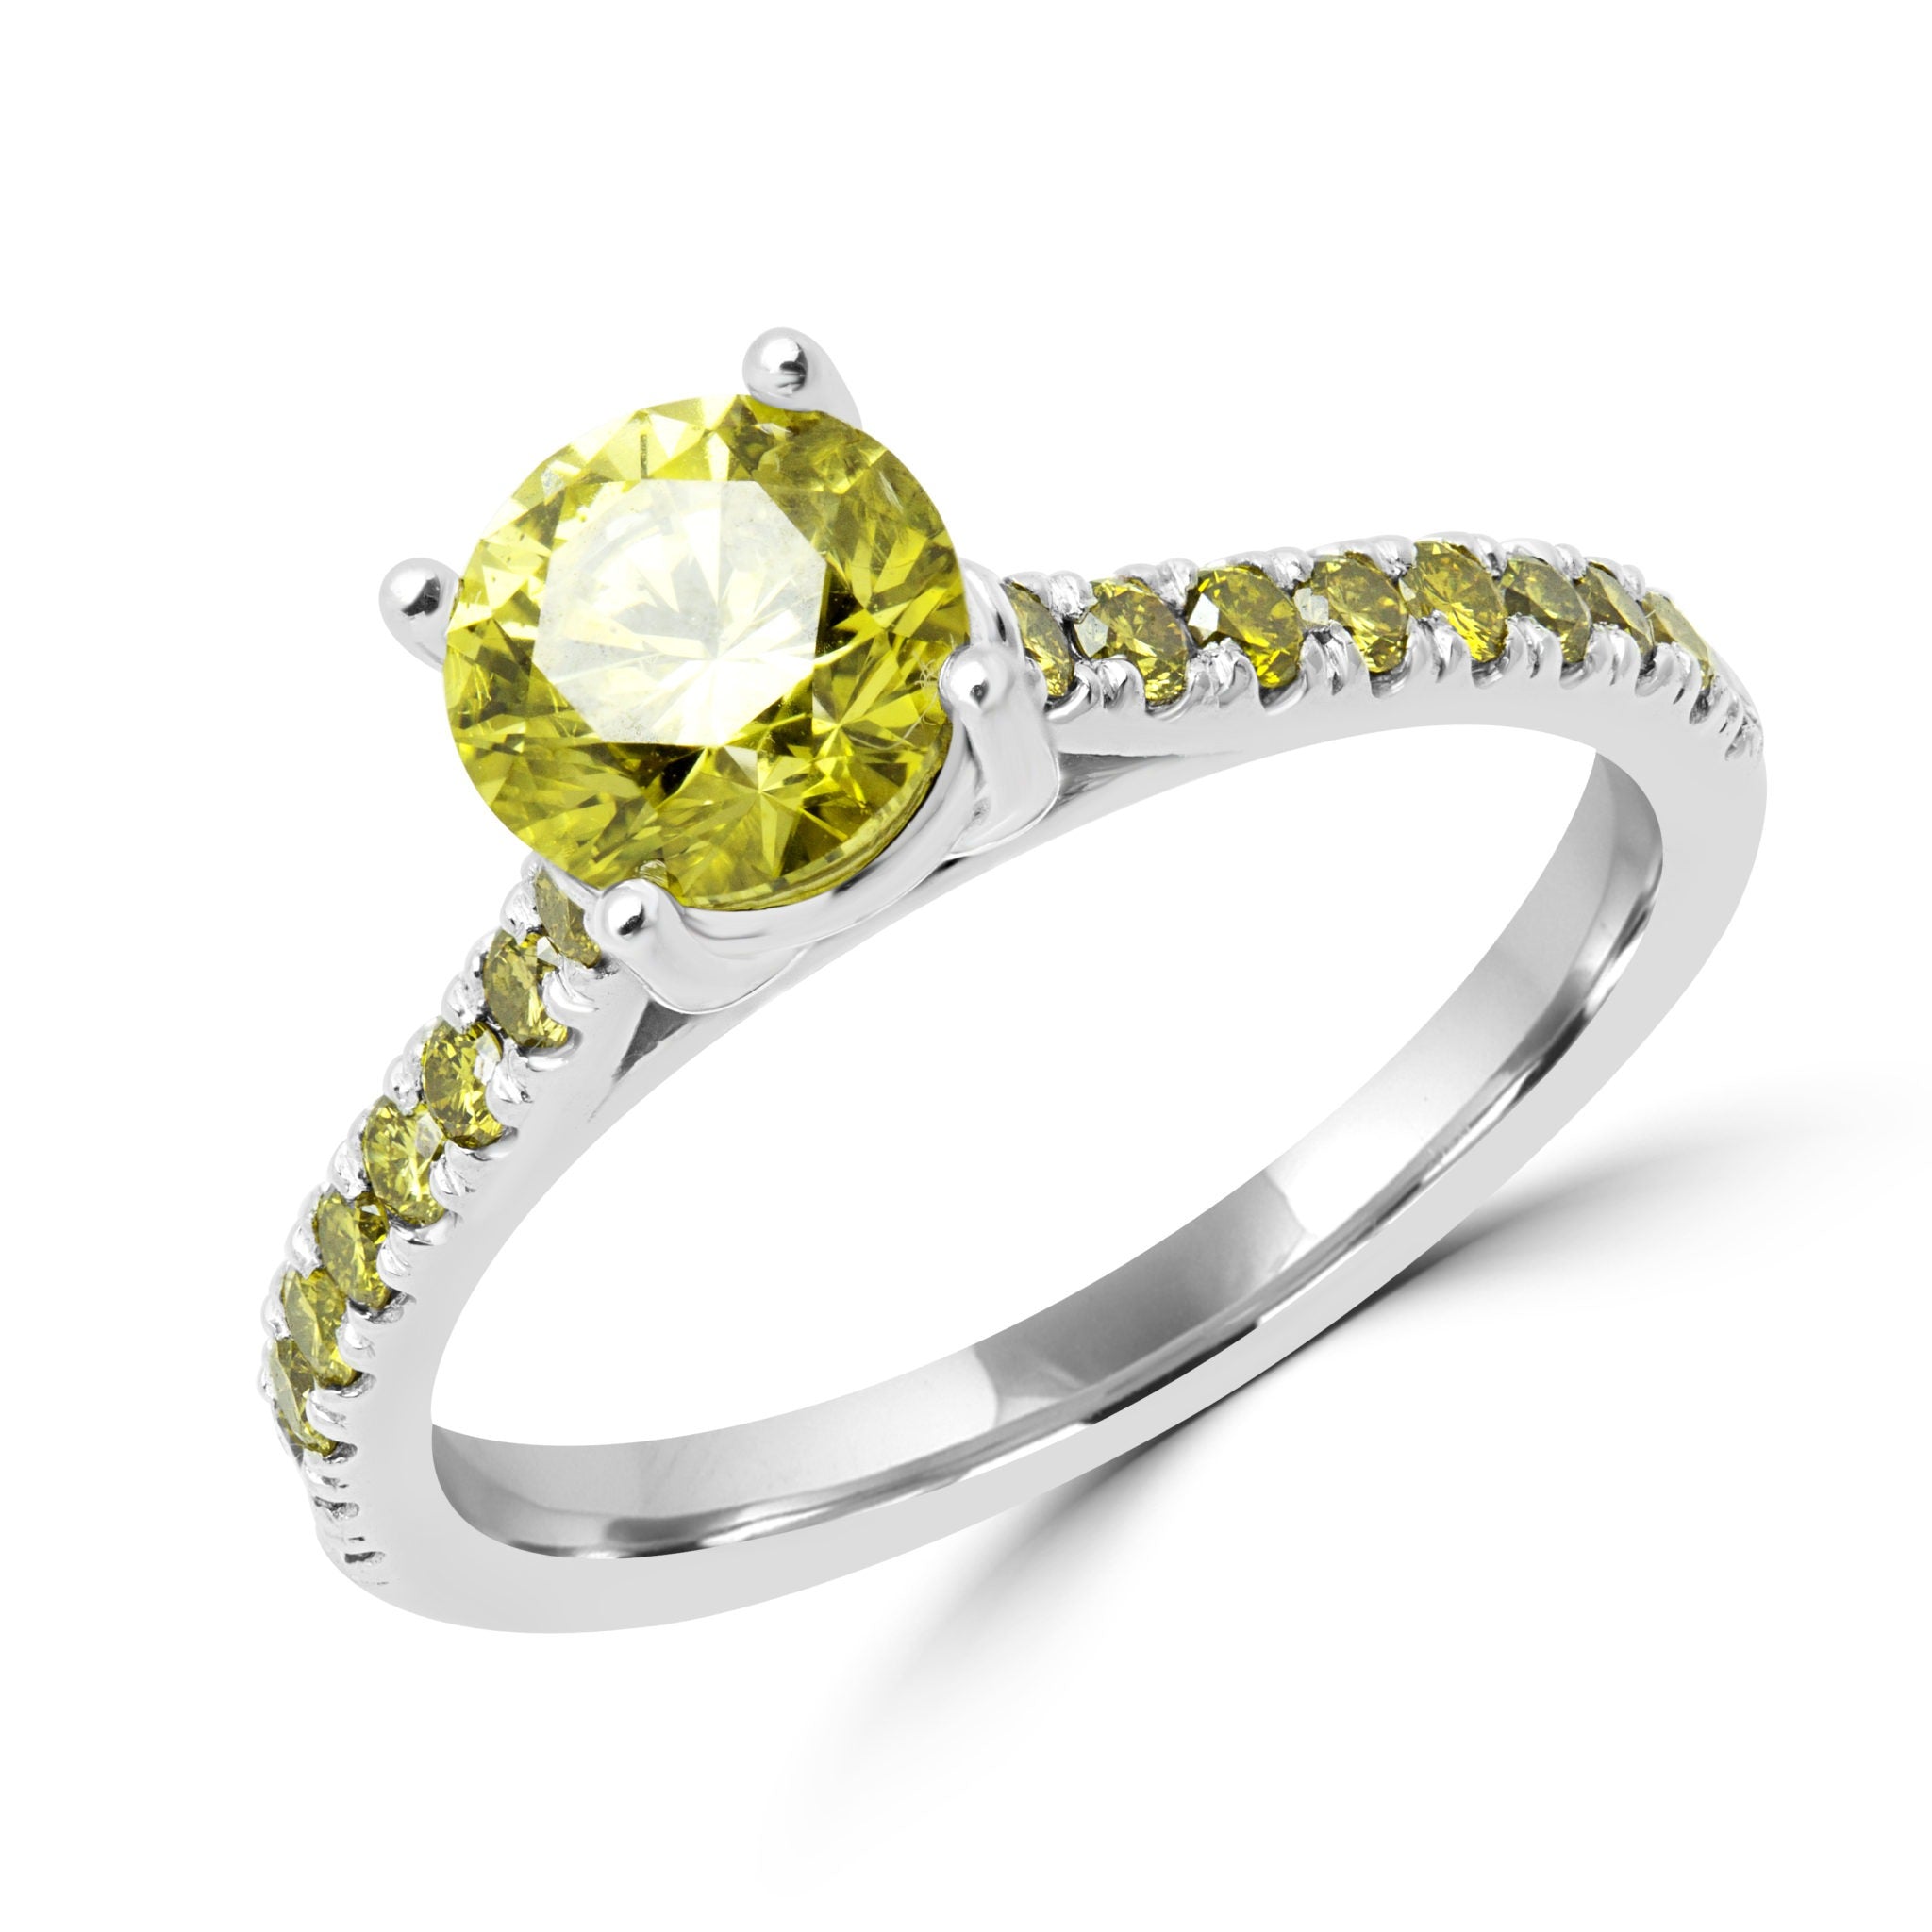 One of a kind solitaire canary diamond engagement ring